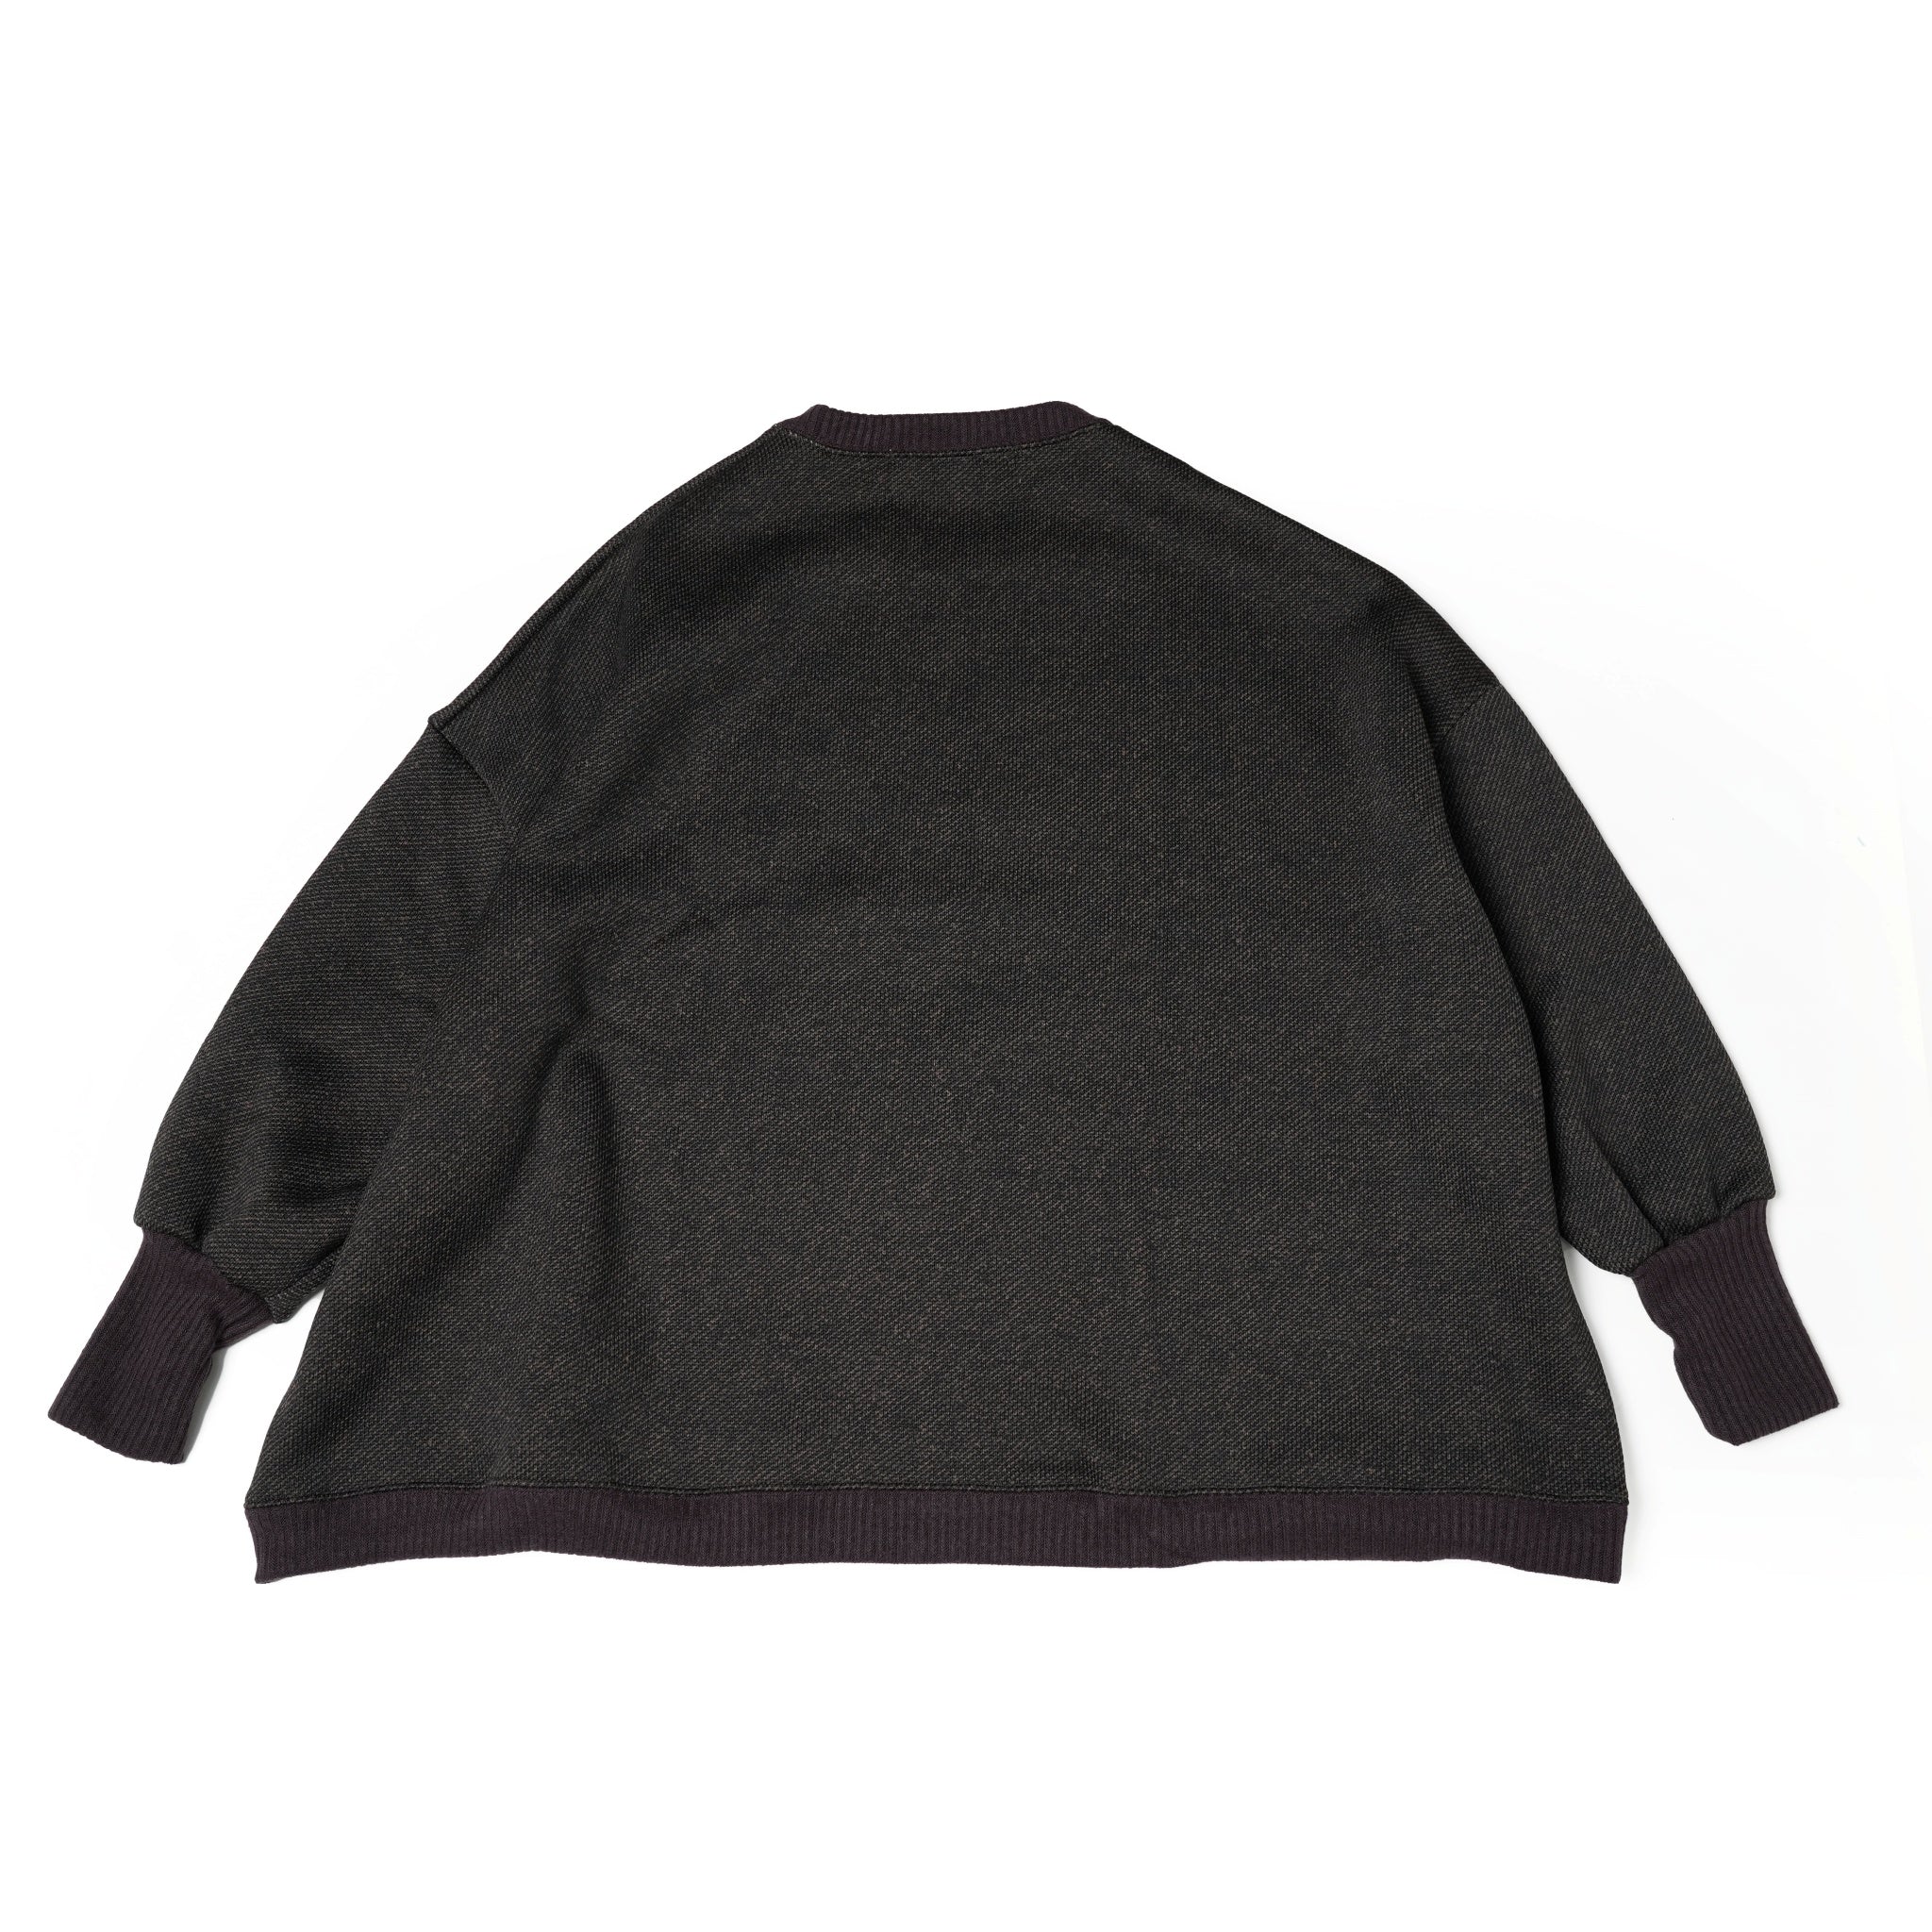 No:bsd23AW-28Ca | Name:Home Sweater Pullover/EUZEEN | Color:Brown【BEDSIDEDRAMA_ベッドサイドドラマ】